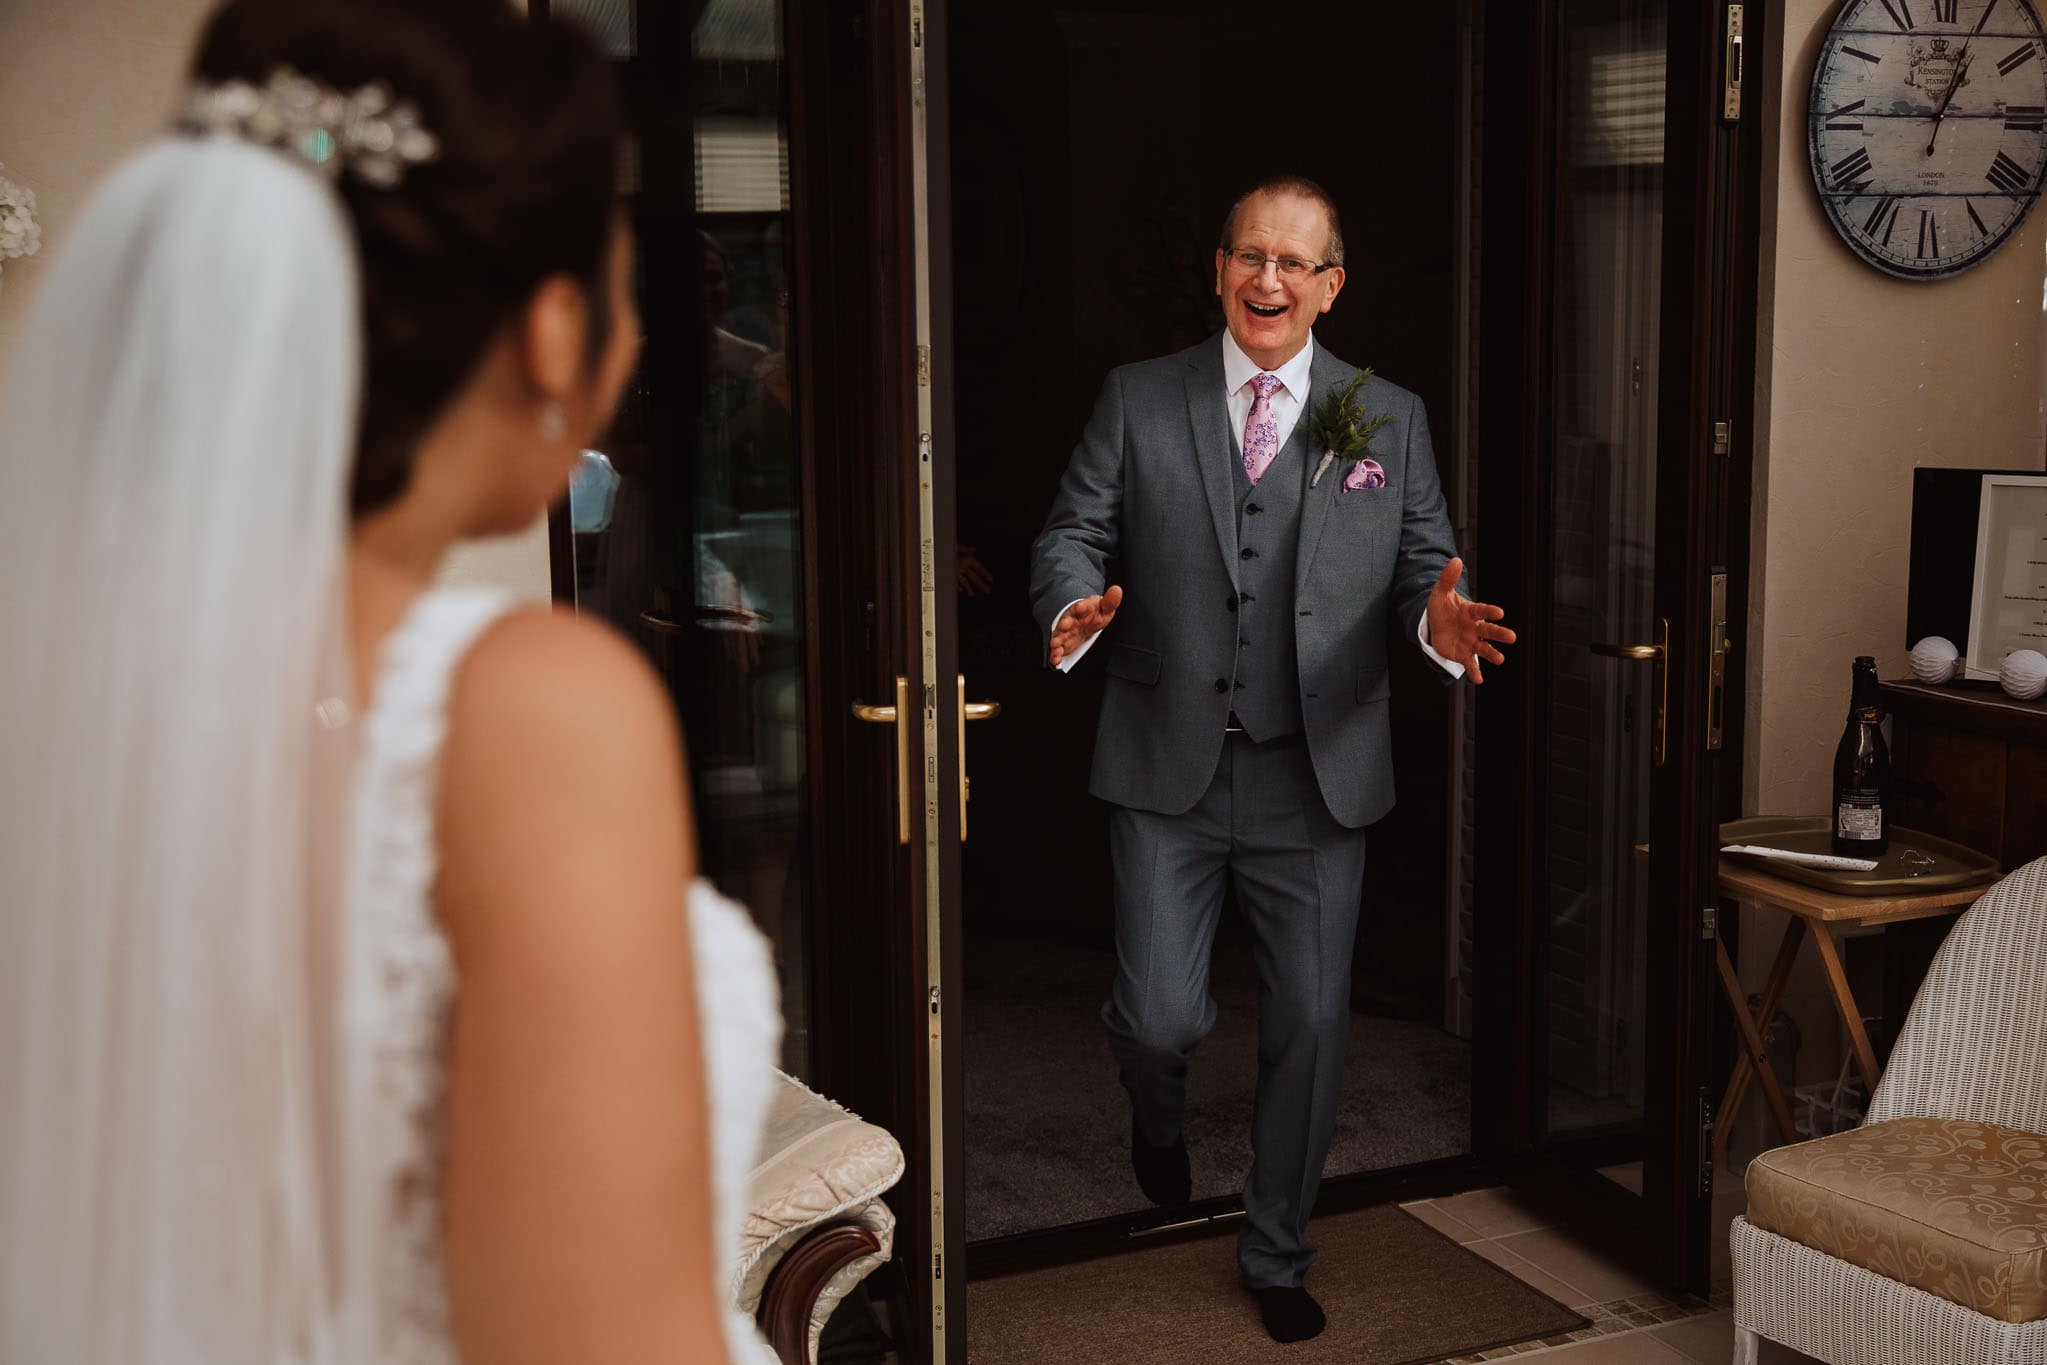 Dad's emotional reaction to seeing bride in her dress